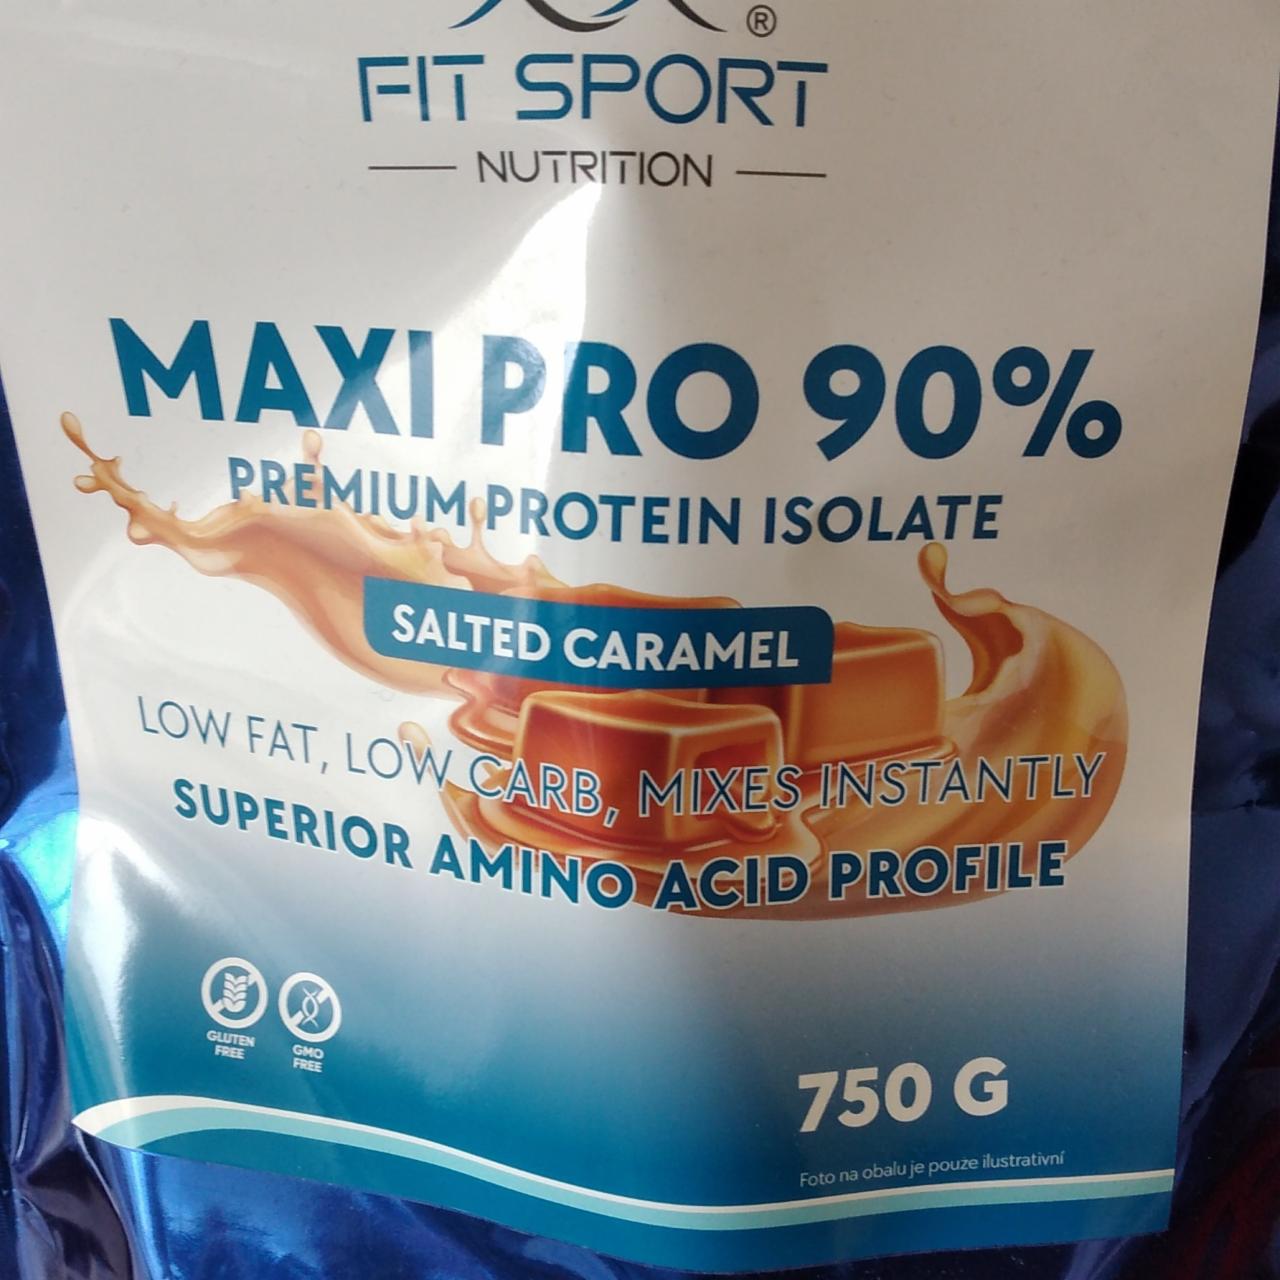 Fotografie - Maxi pro 90% premium protein isolate salted caramel Fit sport nutrition